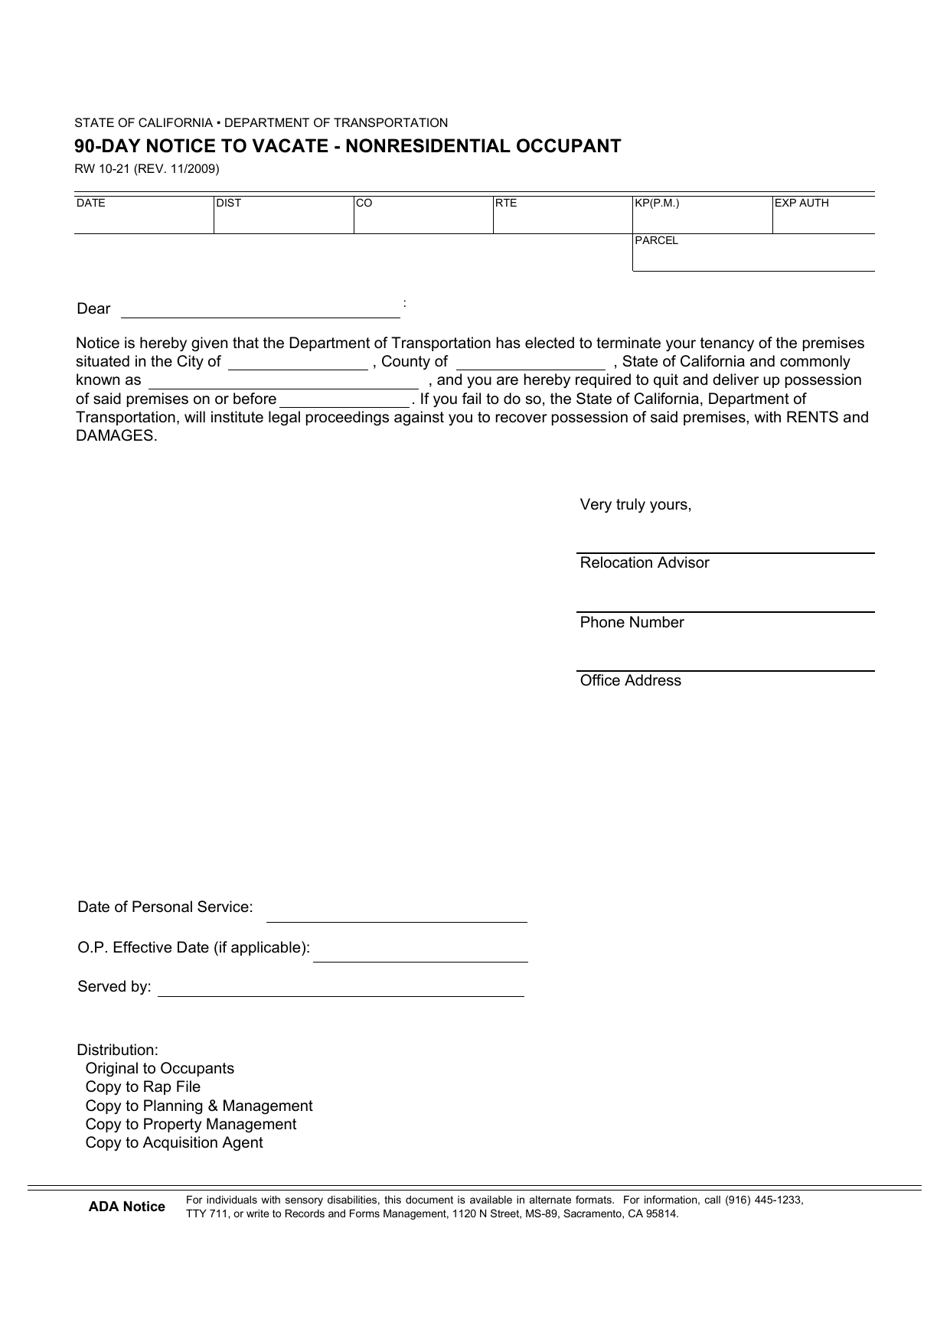 Form RW1021 Download Fillable PDF or Fill Online 90day Notice to